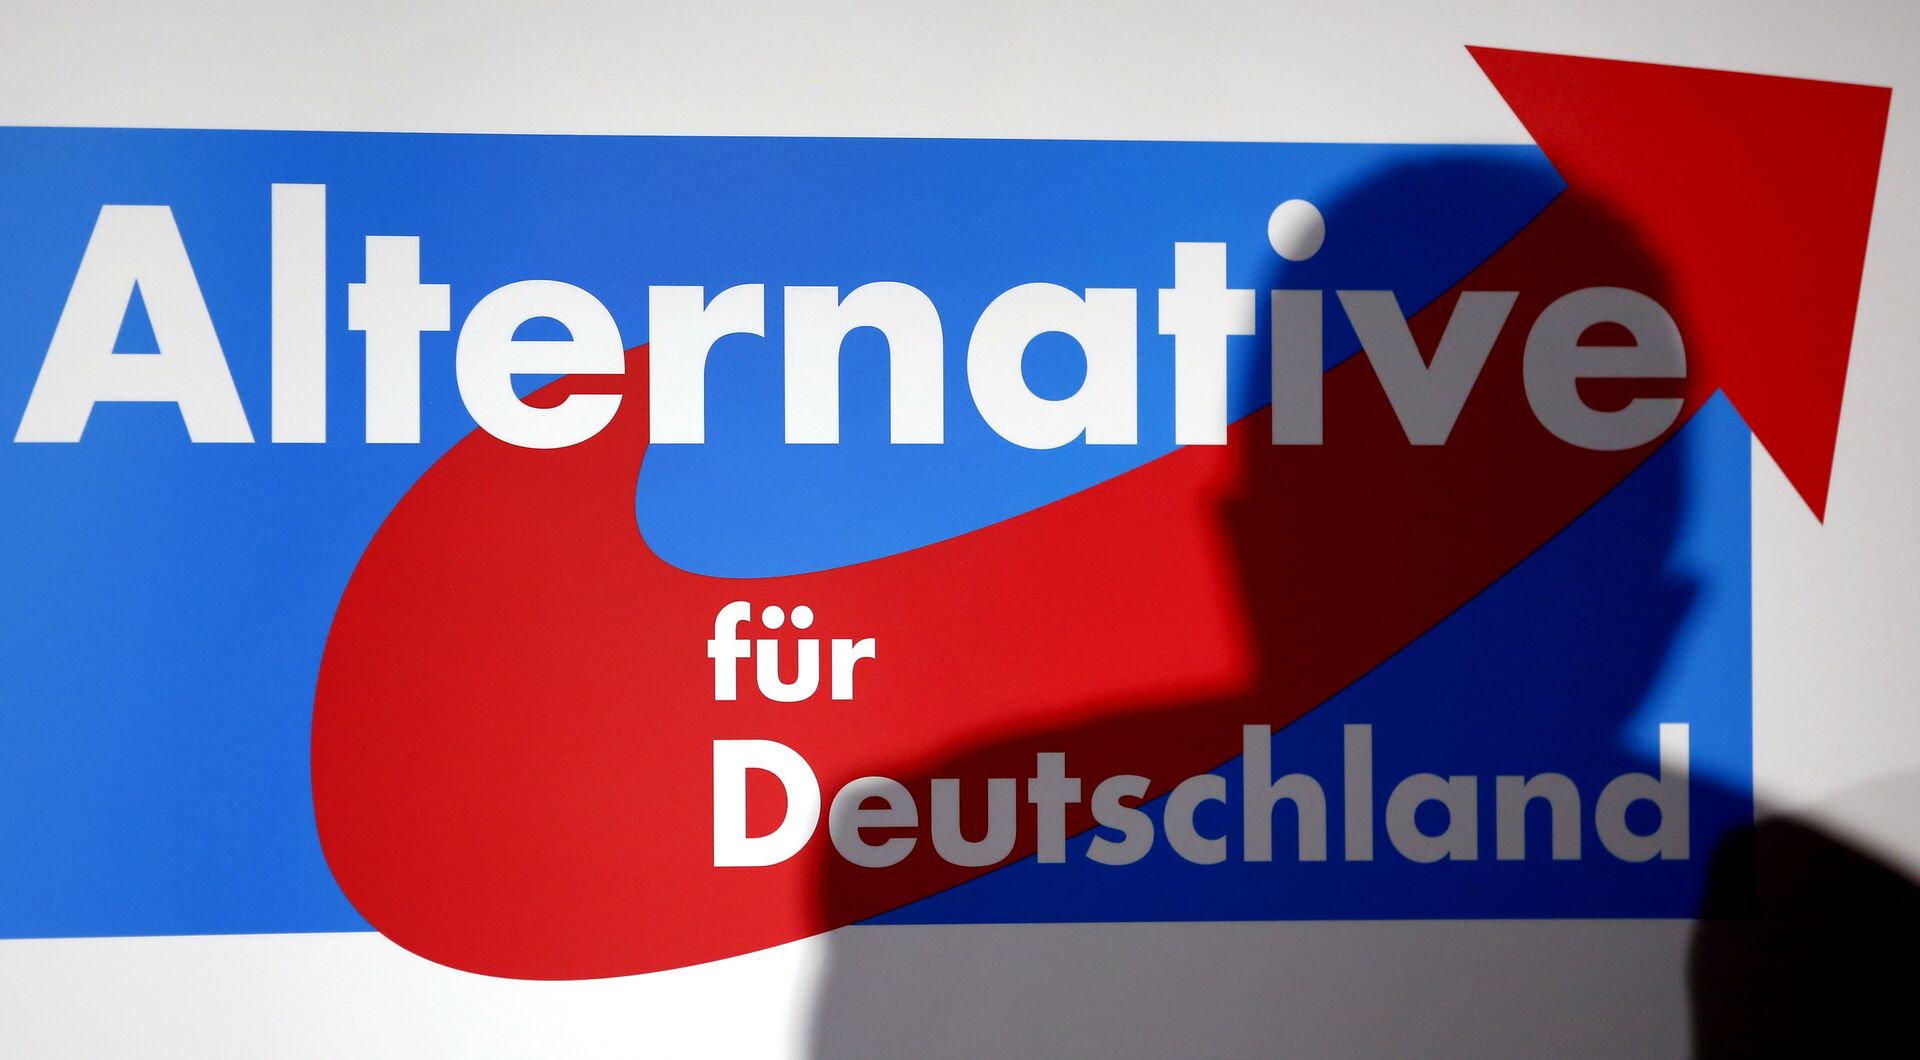 The shadow of the founder of the new German party 'Alternative fuer Deutschland' (Alternative for Germany), Bernd Lucke, is seen in on a logo during the party's founding convention in Berlin, Germany, Sunday, April 14, 2013 - Sputnik International, 1920, 07.09.2021